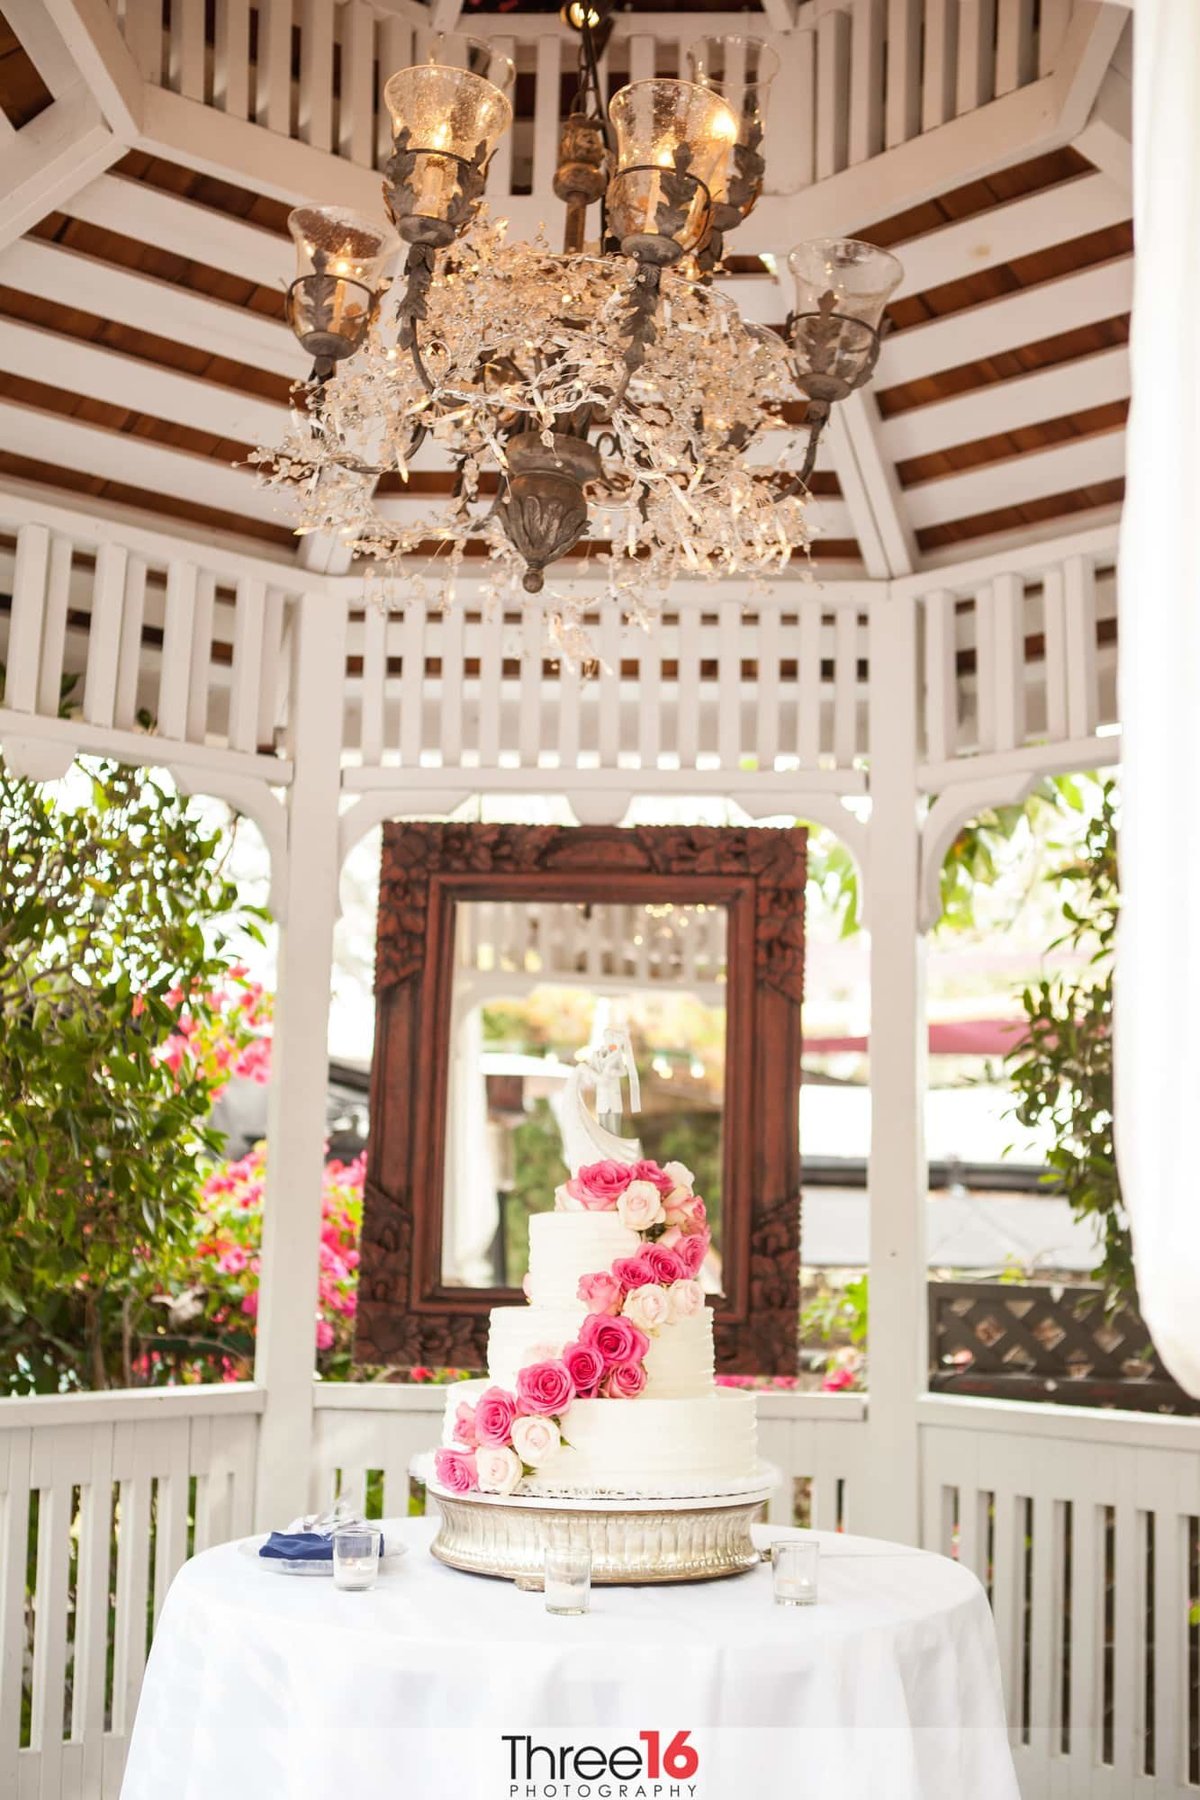 Beautiful 3-tiered white wedding cake with a string of pink flowers draped across it in a gazebo in front of a mirror